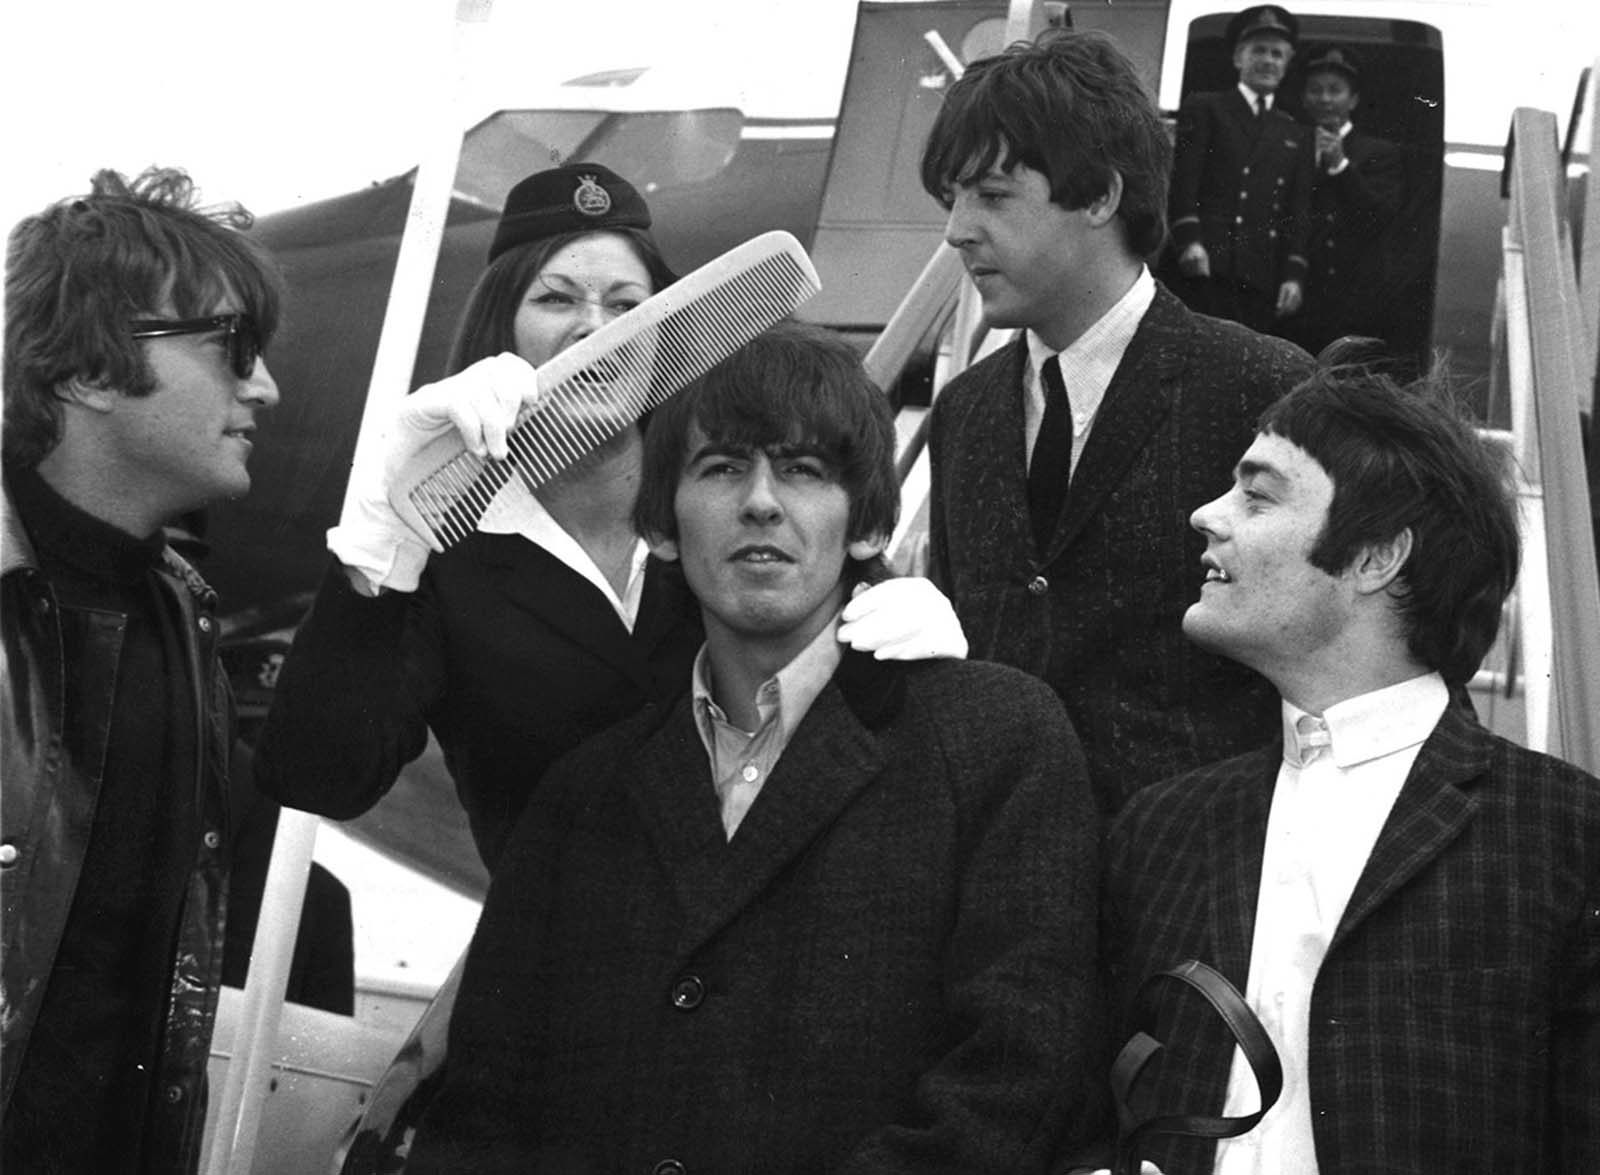 Watched by fellow Beatles, Guitarist George Harrison gets the big comb treatment from BOAC stewardess Anne Creech, after their arrival at Windy airport in London, England, on June 7, 1964. From left: John Lennon, George Harrison, Paul McCartney and drummer Jimmy Nicol, who stood in for Ringo Starr for the trip to The Netherlands.